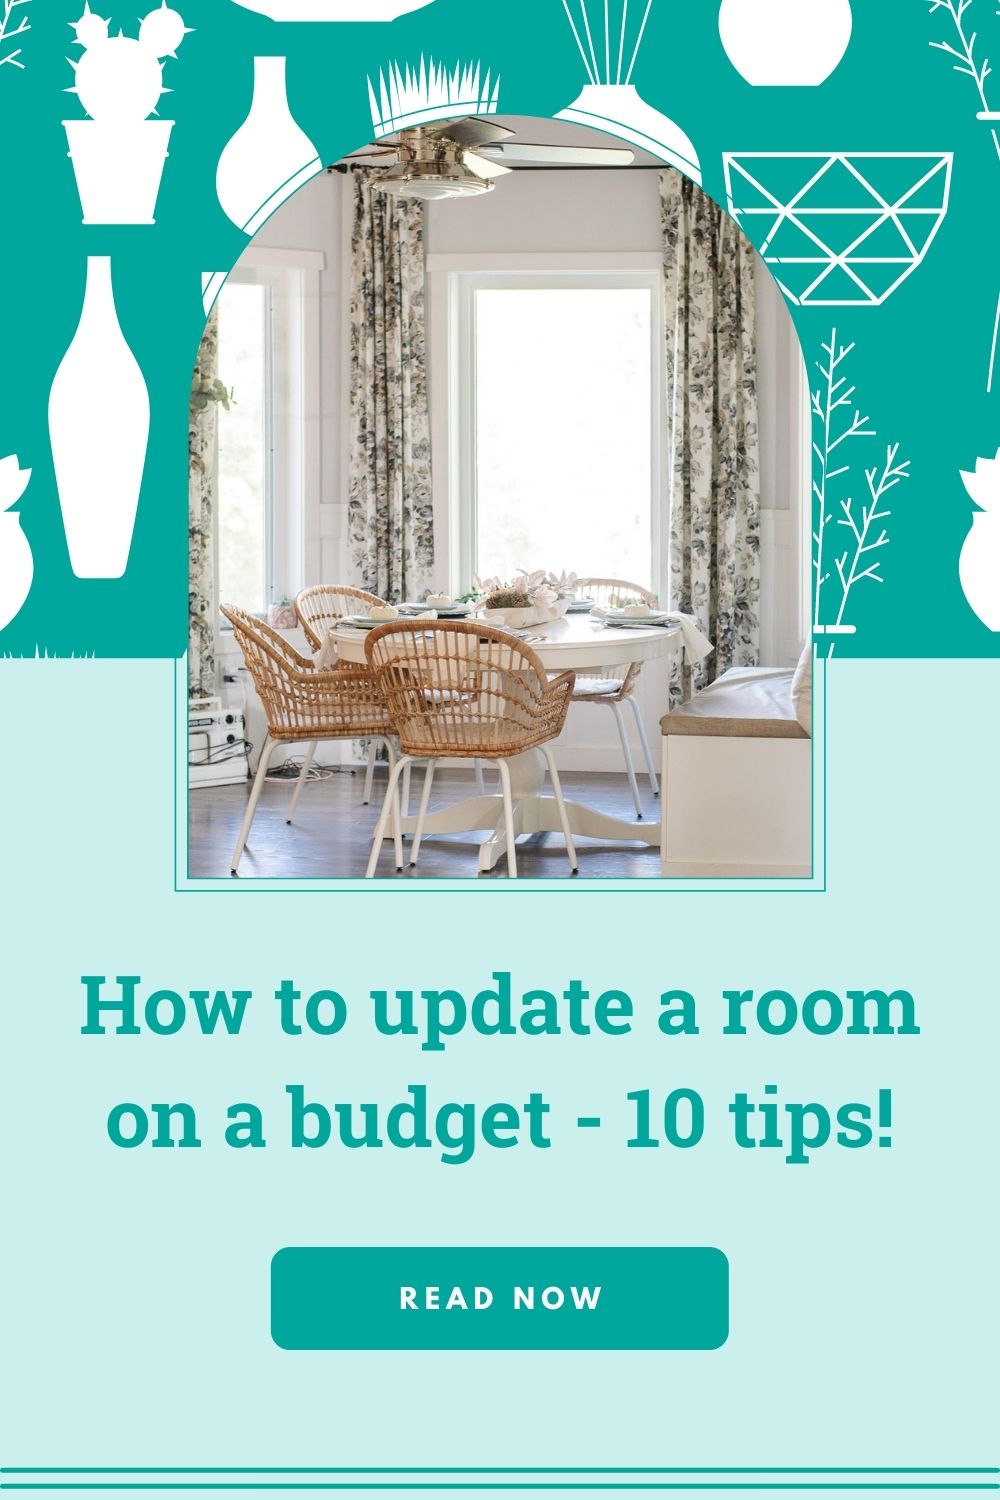 Here's how to update your room on a budget... no wall painting required!